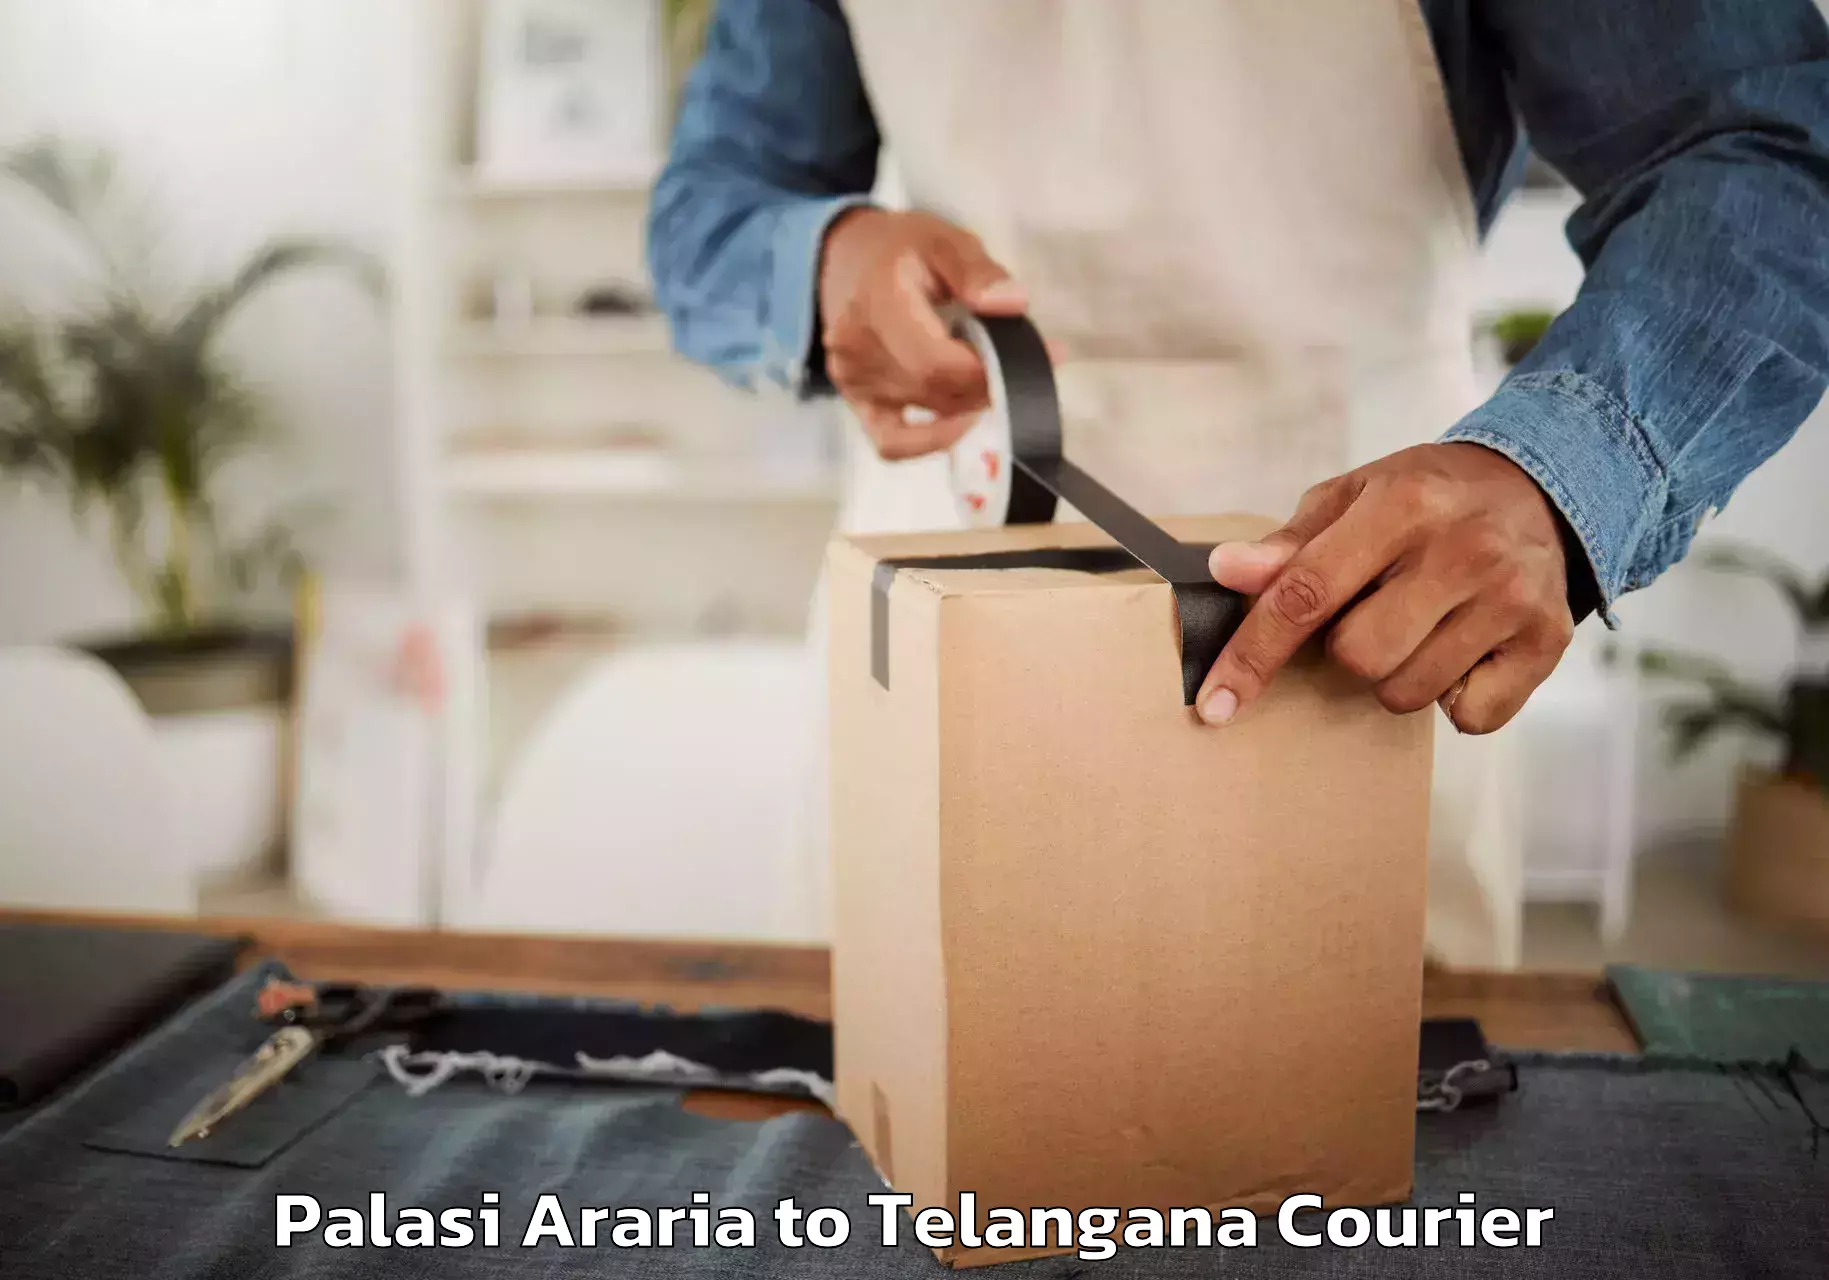 Household goods delivery in Palasi Araria to Kamalapur